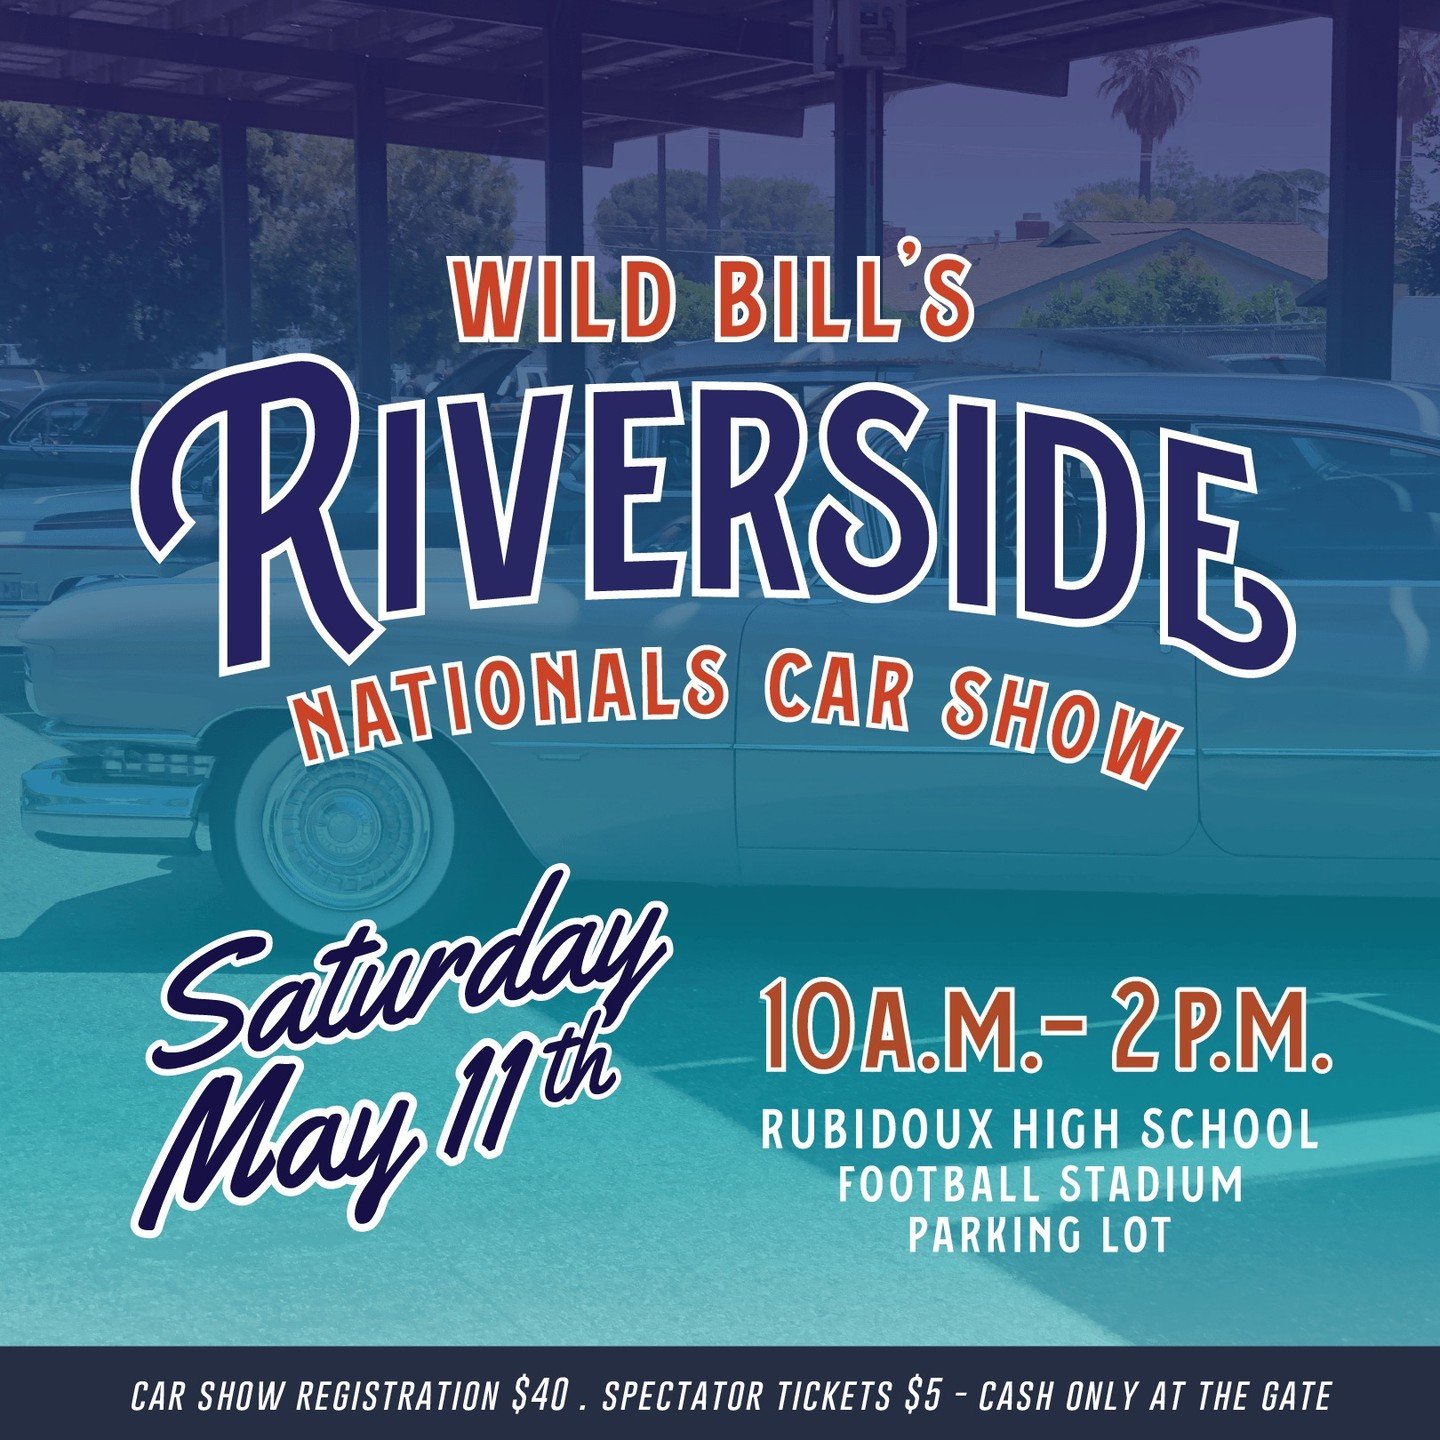 Things to Know Before You Go to Wild Bill's Riverside Nationals Car Show

Saturday, May 11, 2024
10:00 a.m. - 2 p.m.
Rubidoux High School 
Football Stadium Parking Lot
Jurupa Valley

📍Entrance to show is at 42nd St. &amp; Pacific Ave. 
👀 NO Entry o